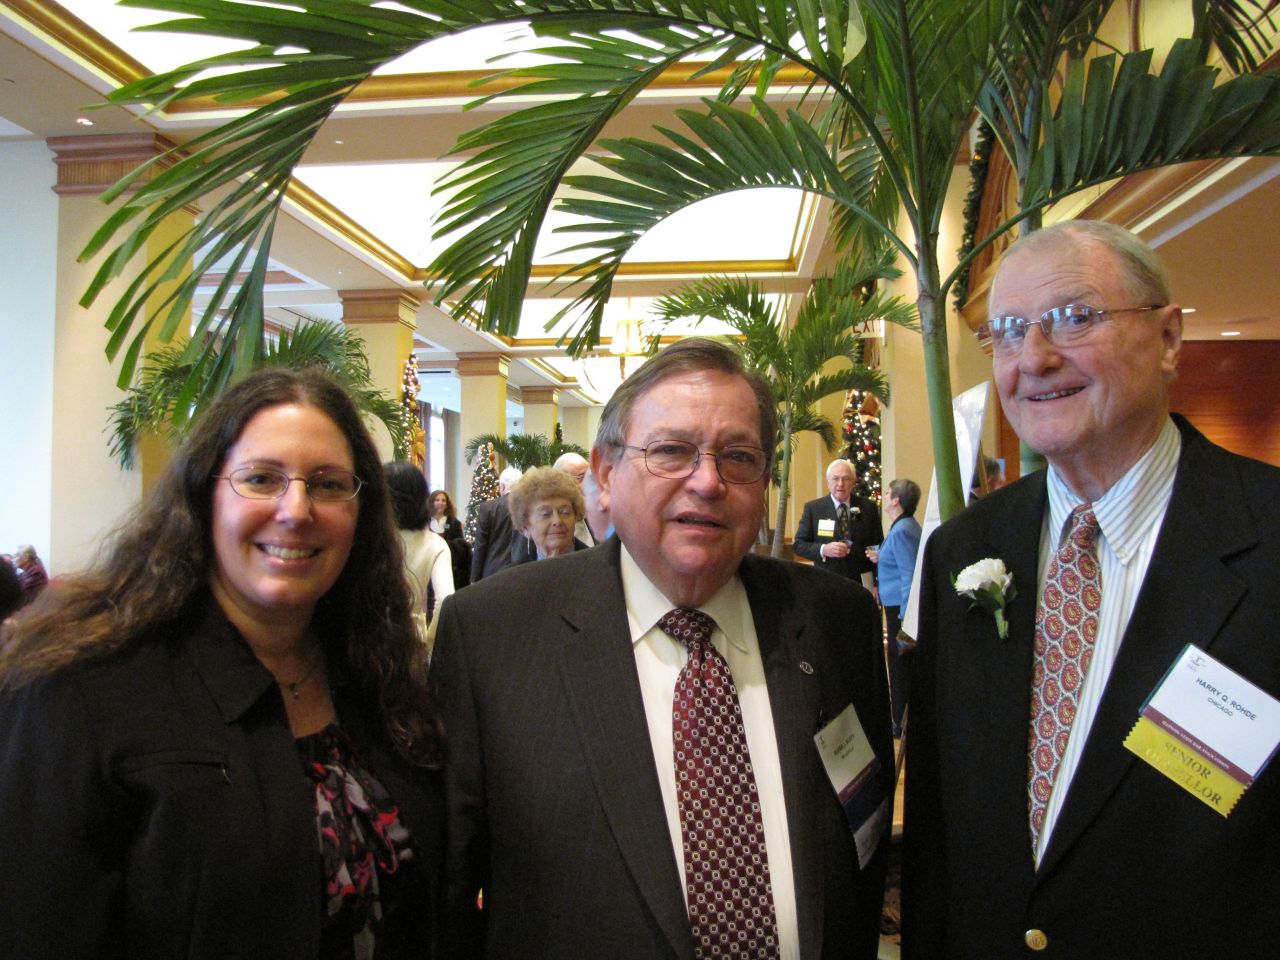 IBF Executive Director Susan Lewers, Board of Governors member Russell Scott and Senior Counsellors honoree Harry Rohde